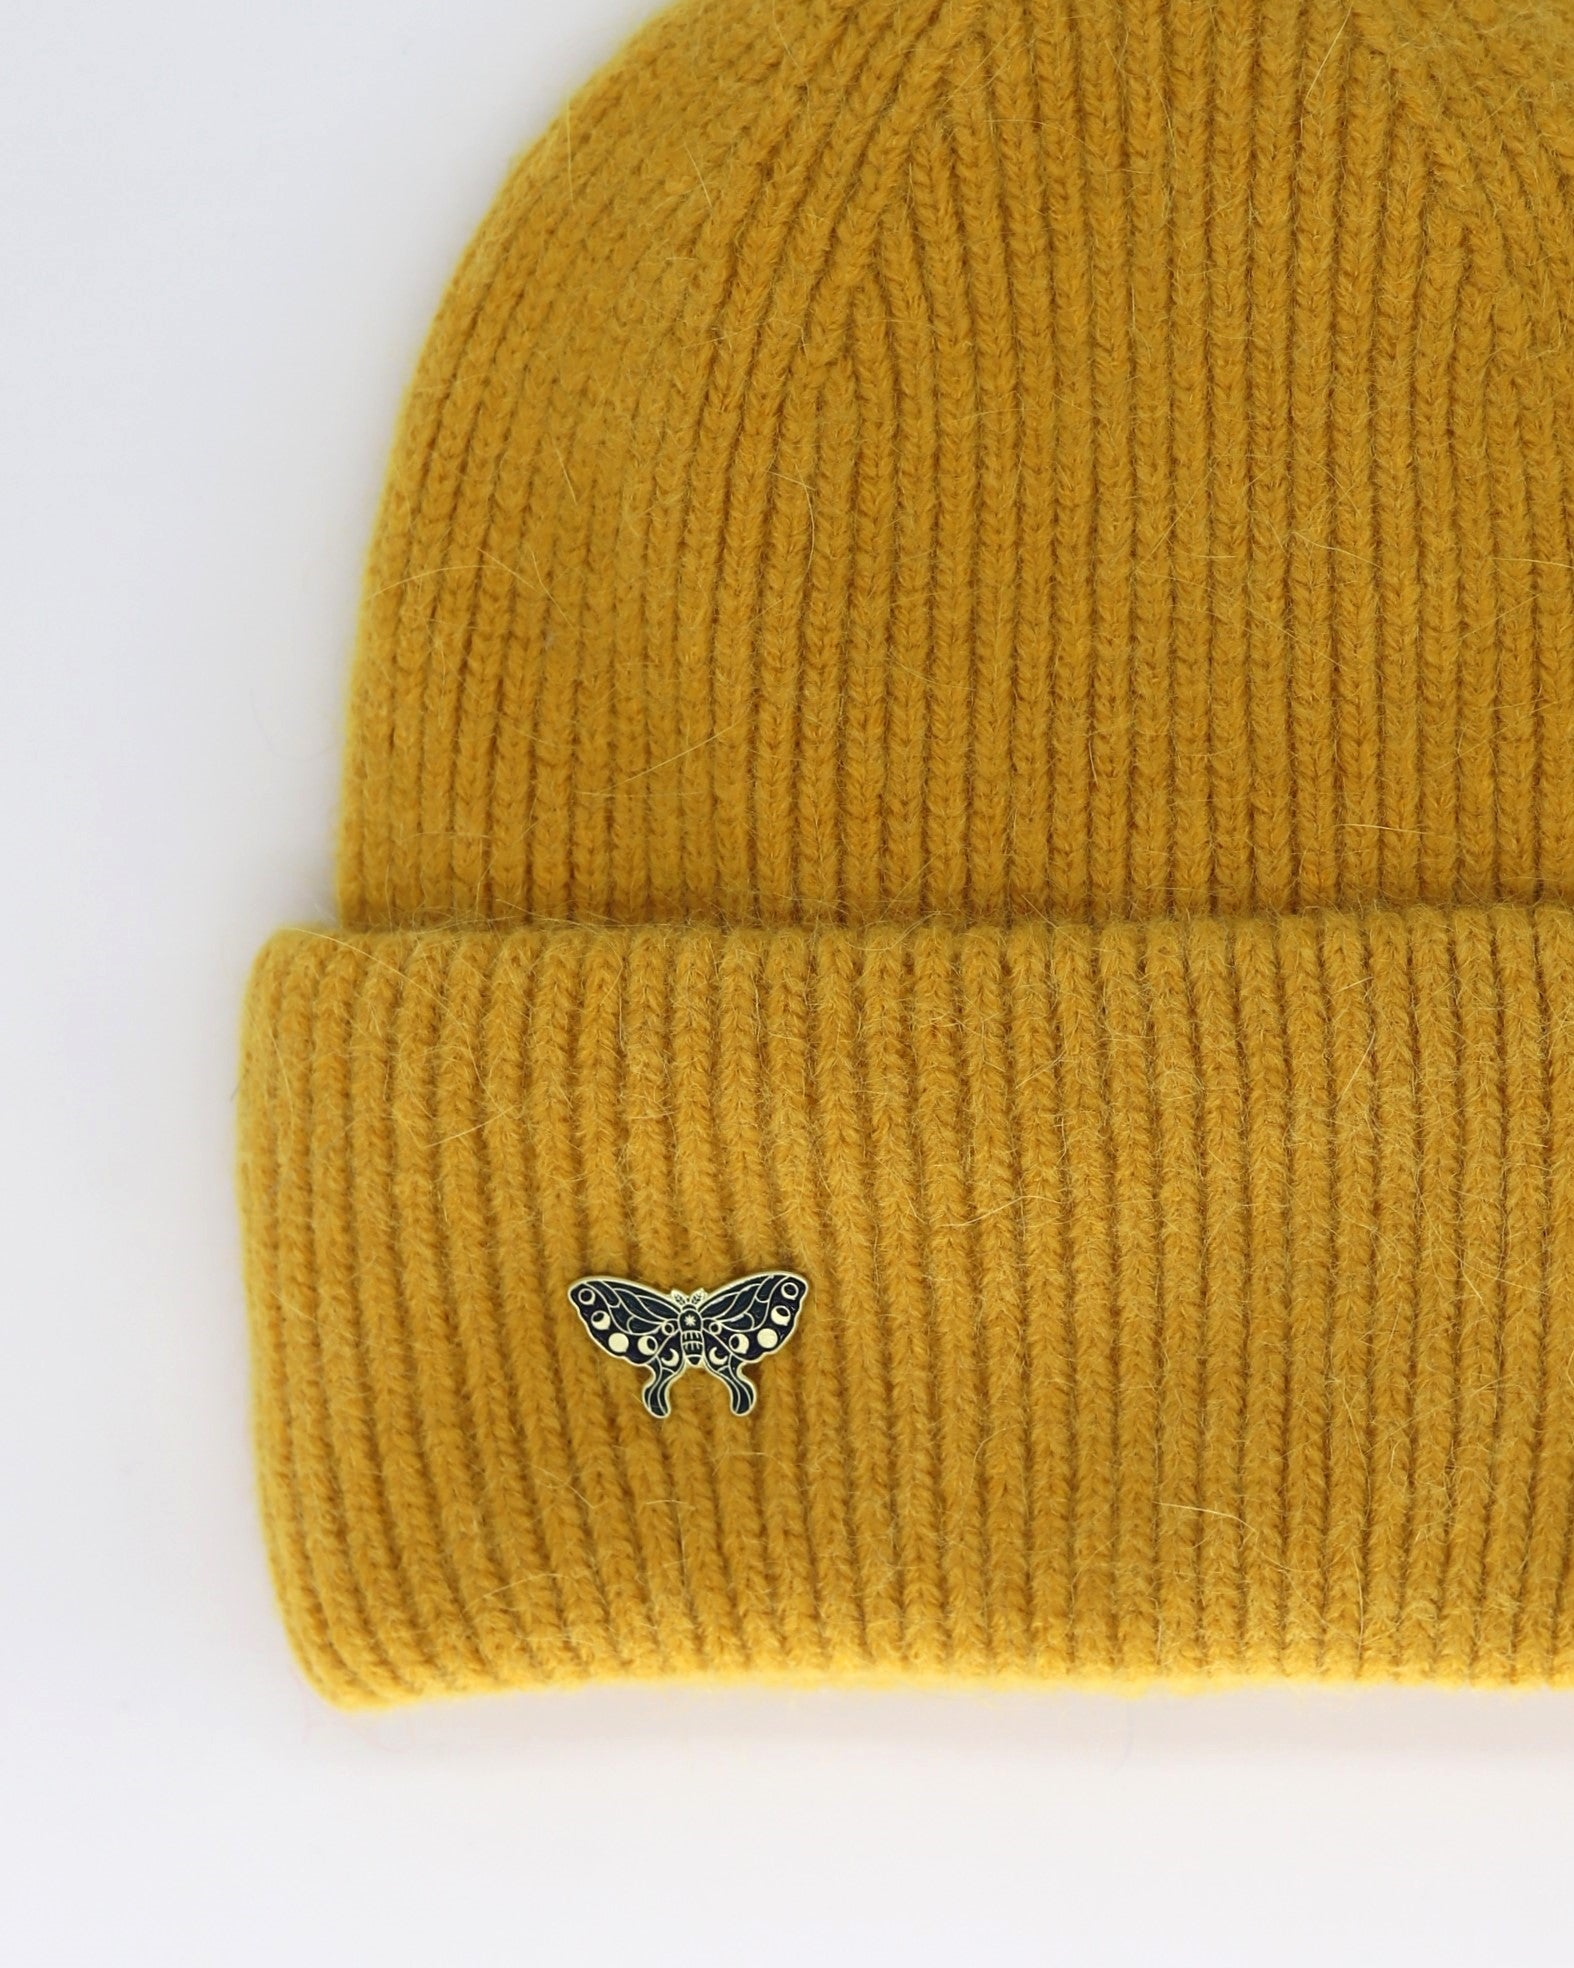 This Hat is a finest hat with a classic silhouette from Villanelle. A luxurious accessory for women made from the softest natural angora and sheep wool for extreme comfort and warmth. It is made in a trendy mustard yellow color accompanied by an elegant pin. This product is sourced and manufactured in Poland.